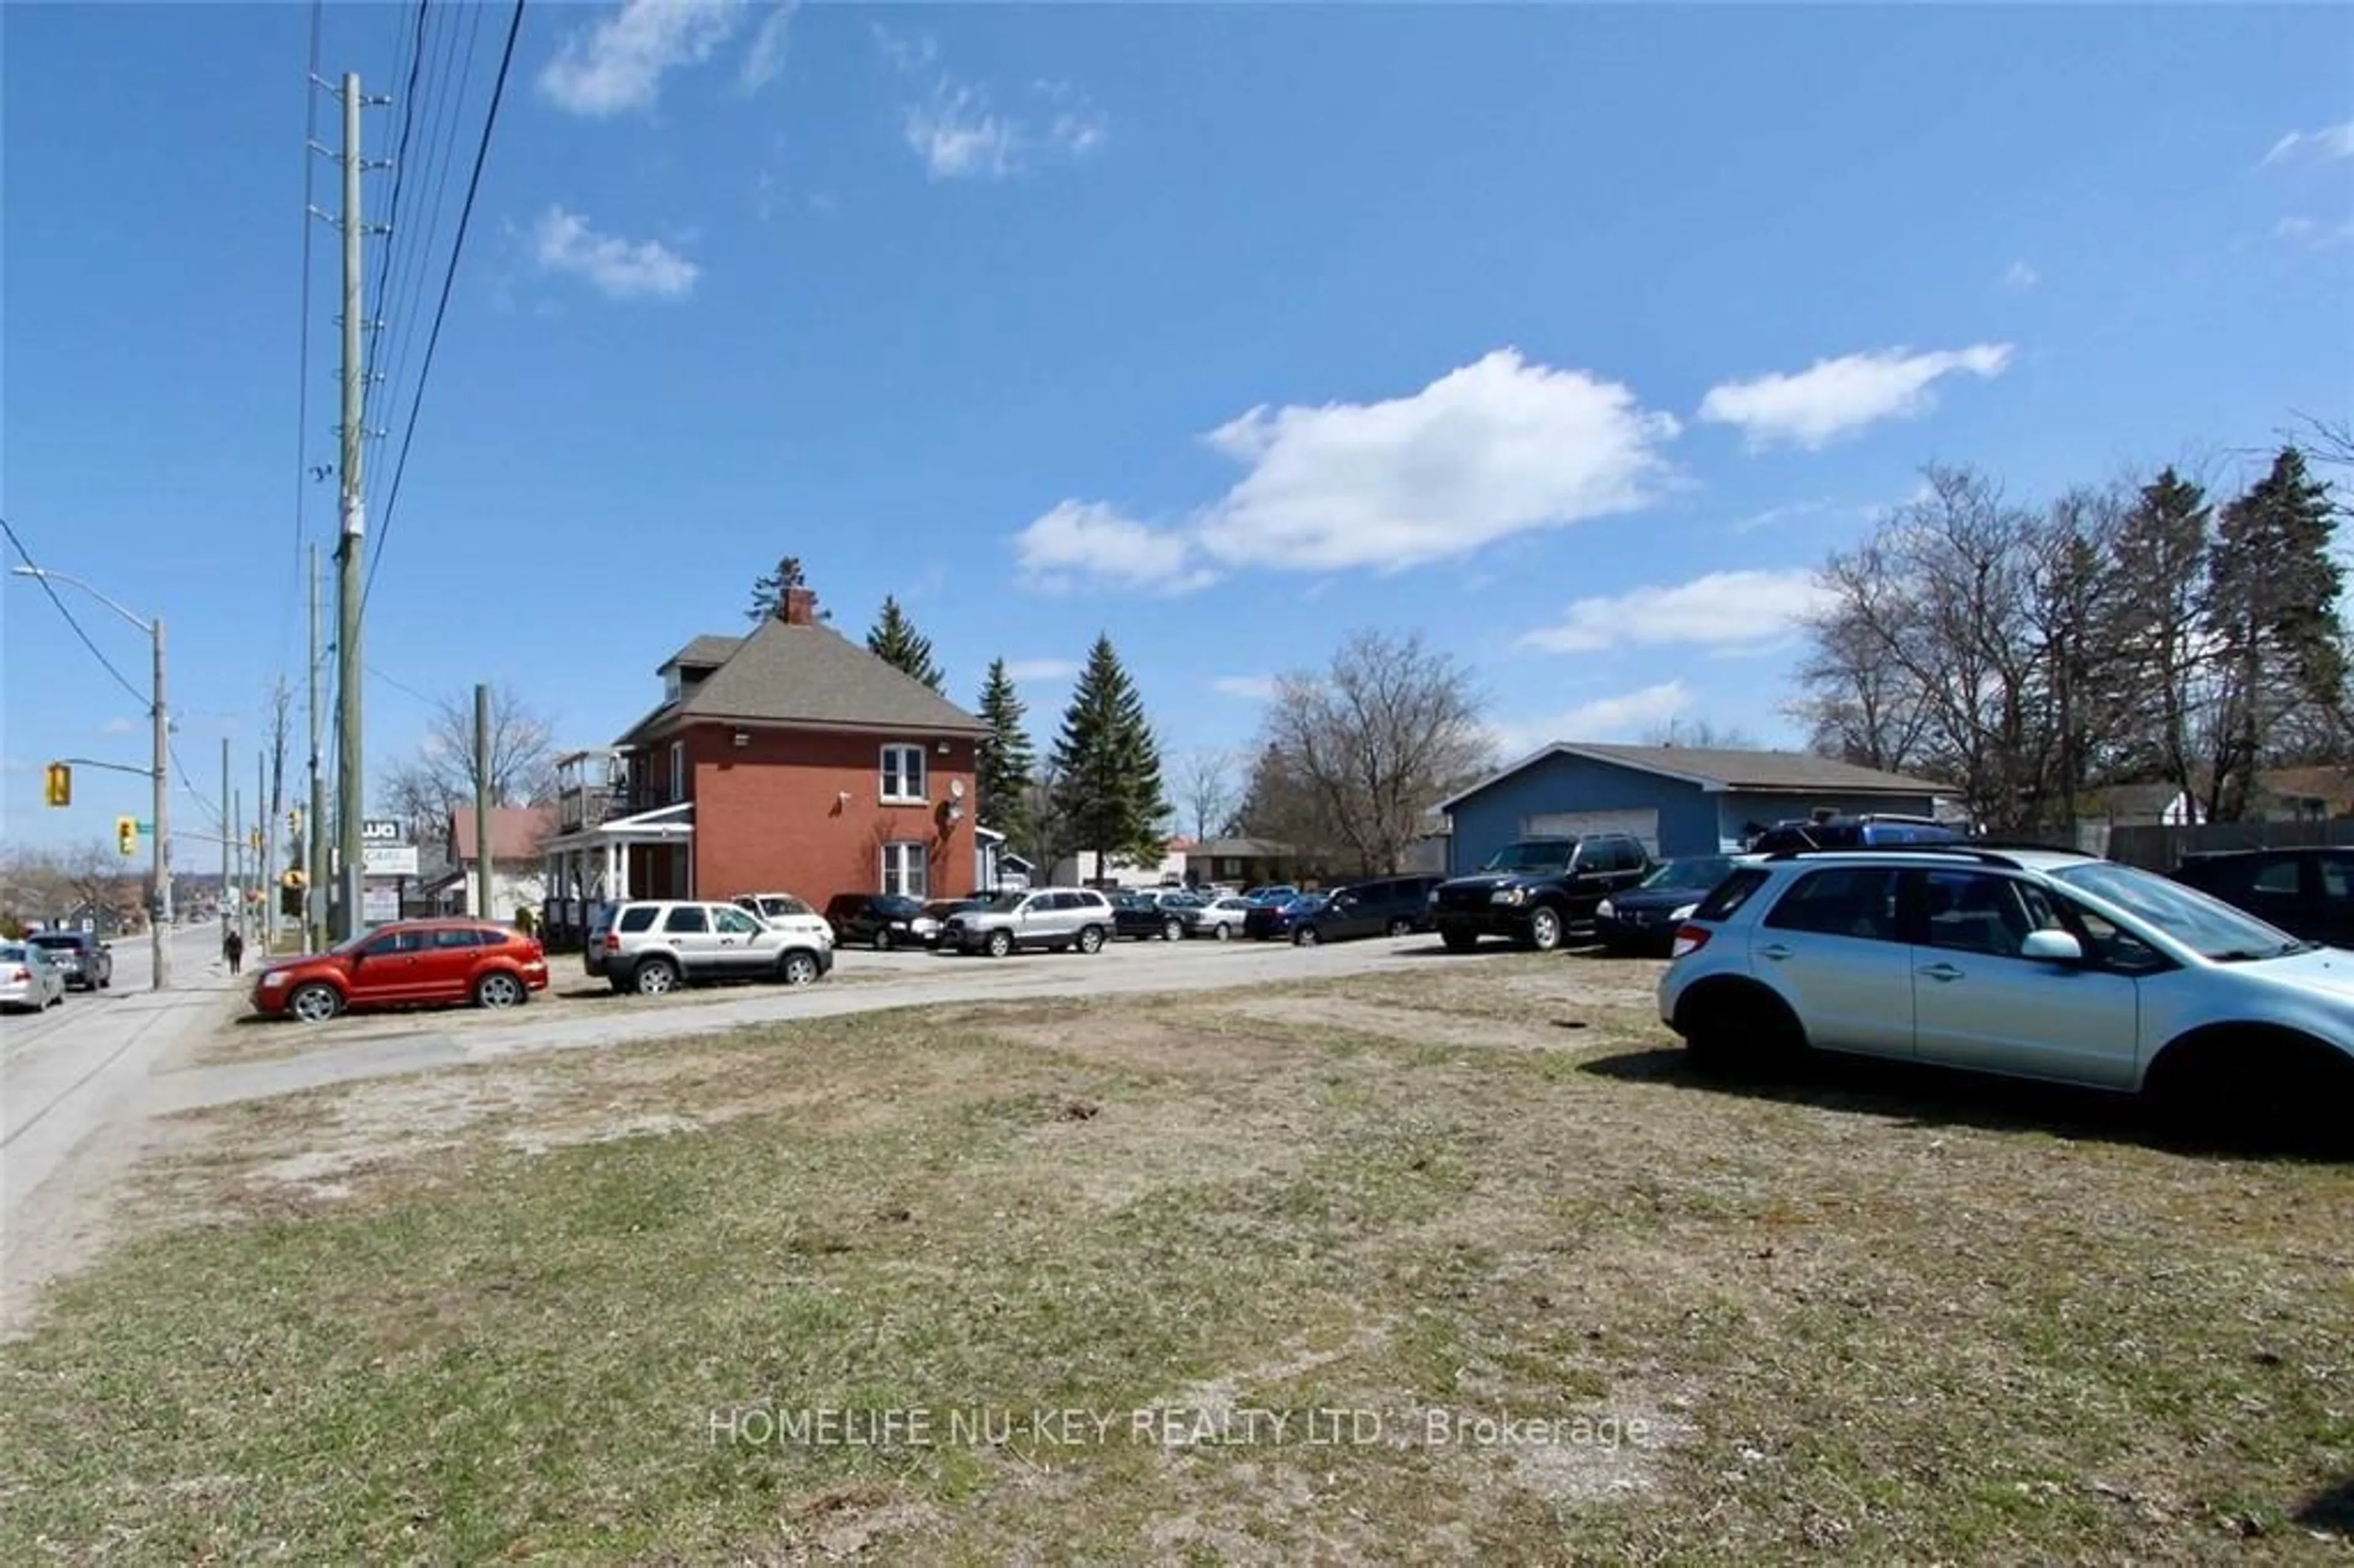 Street view for 150 Essa Rd, Barrie Ontario L4N 3L1